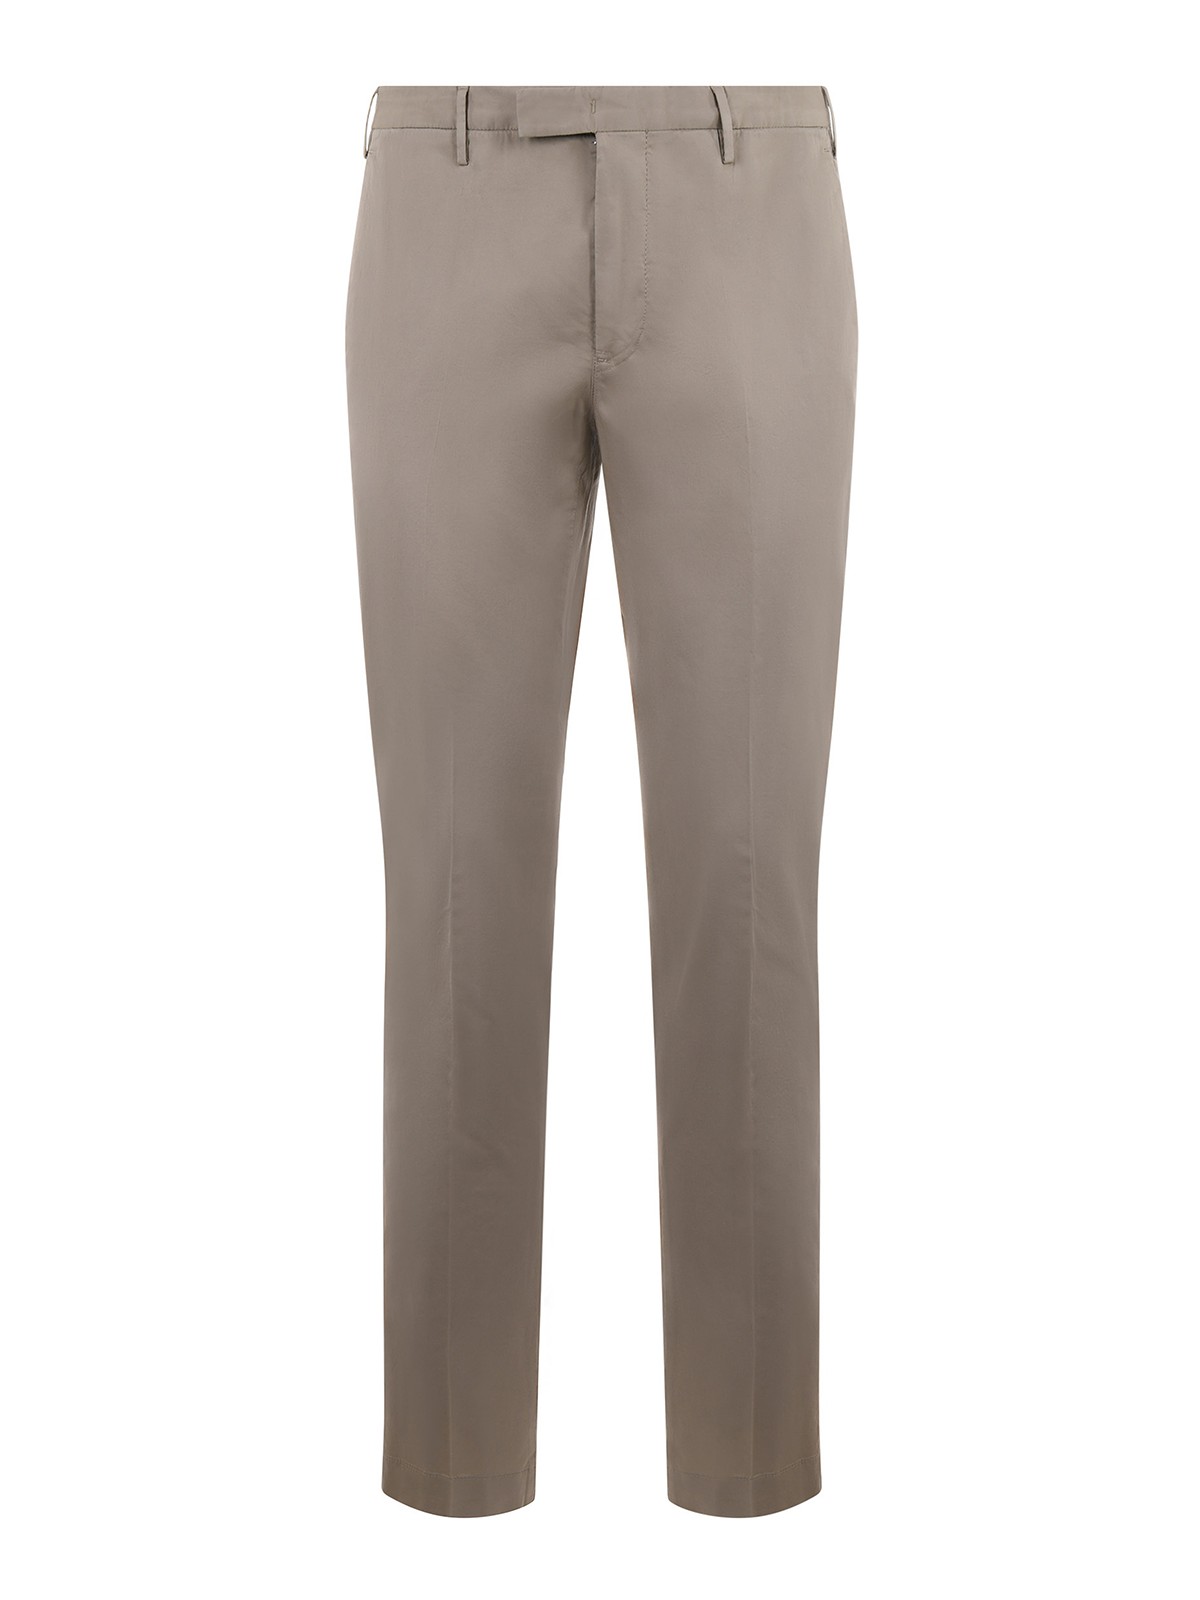 Pt Torino Cotton Trousers With Concealead Closure In Beige